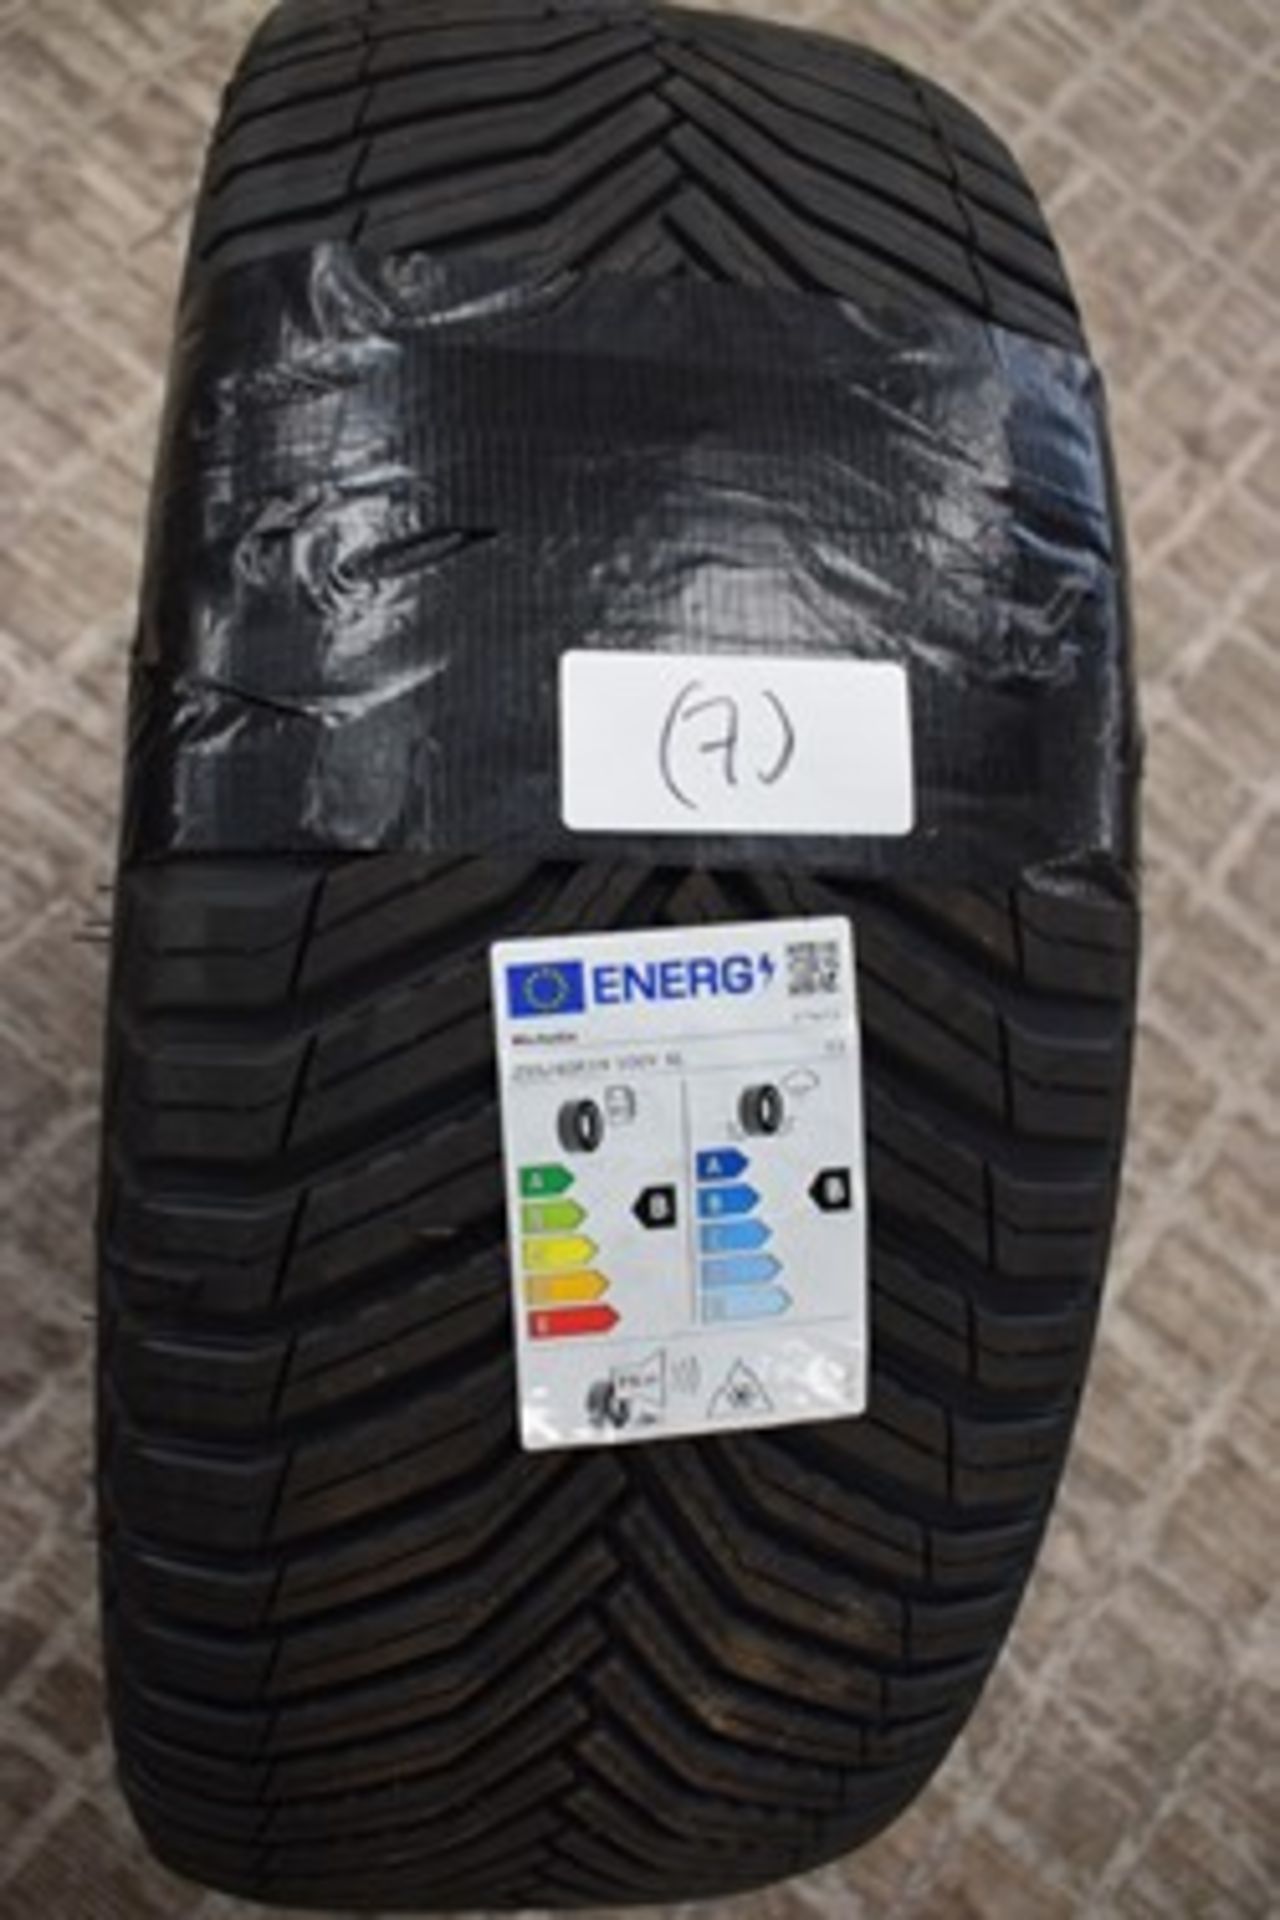 1 x Michelin Cross Climate 2 tyre, size 255/LOR19 100Y XL - new with label (C1)(7)